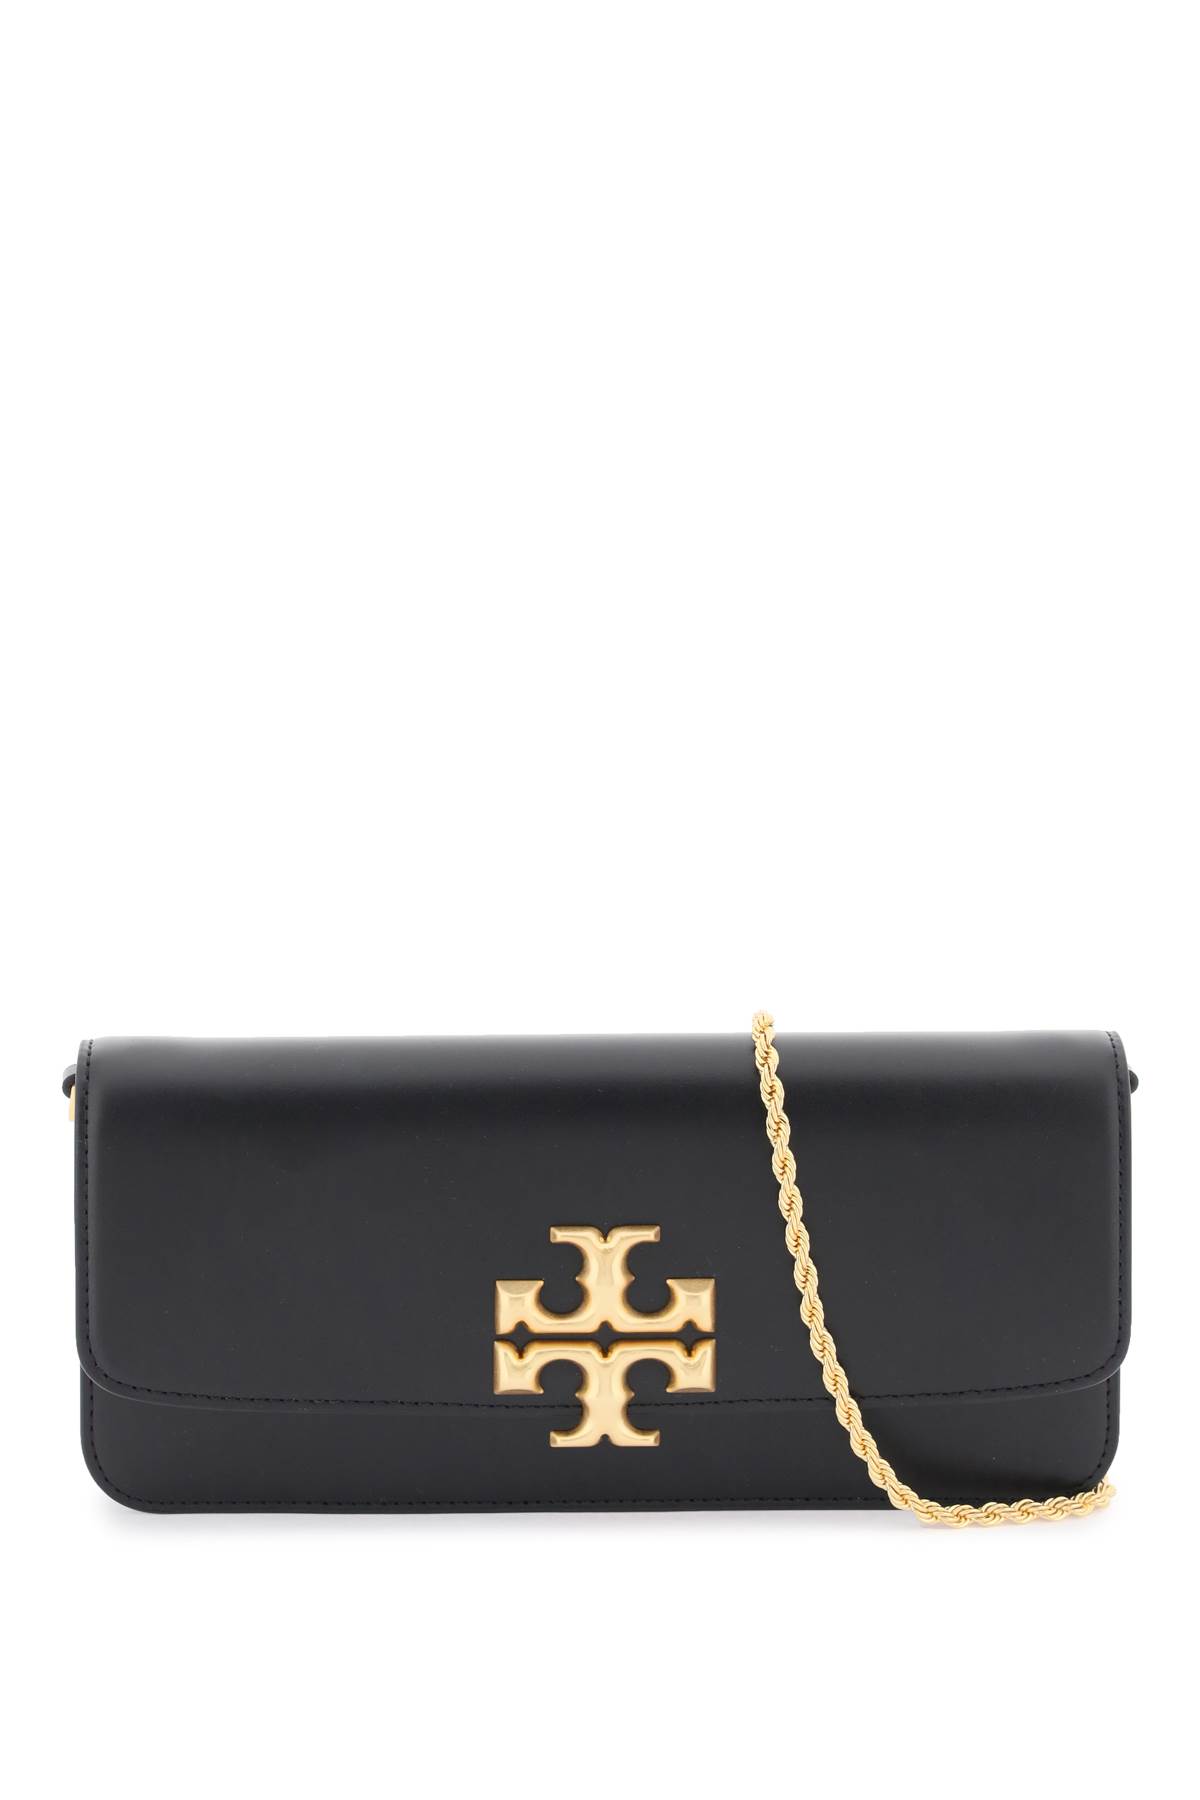 TORY BURCH ELEANOR CLUTCH WITH CHAIN